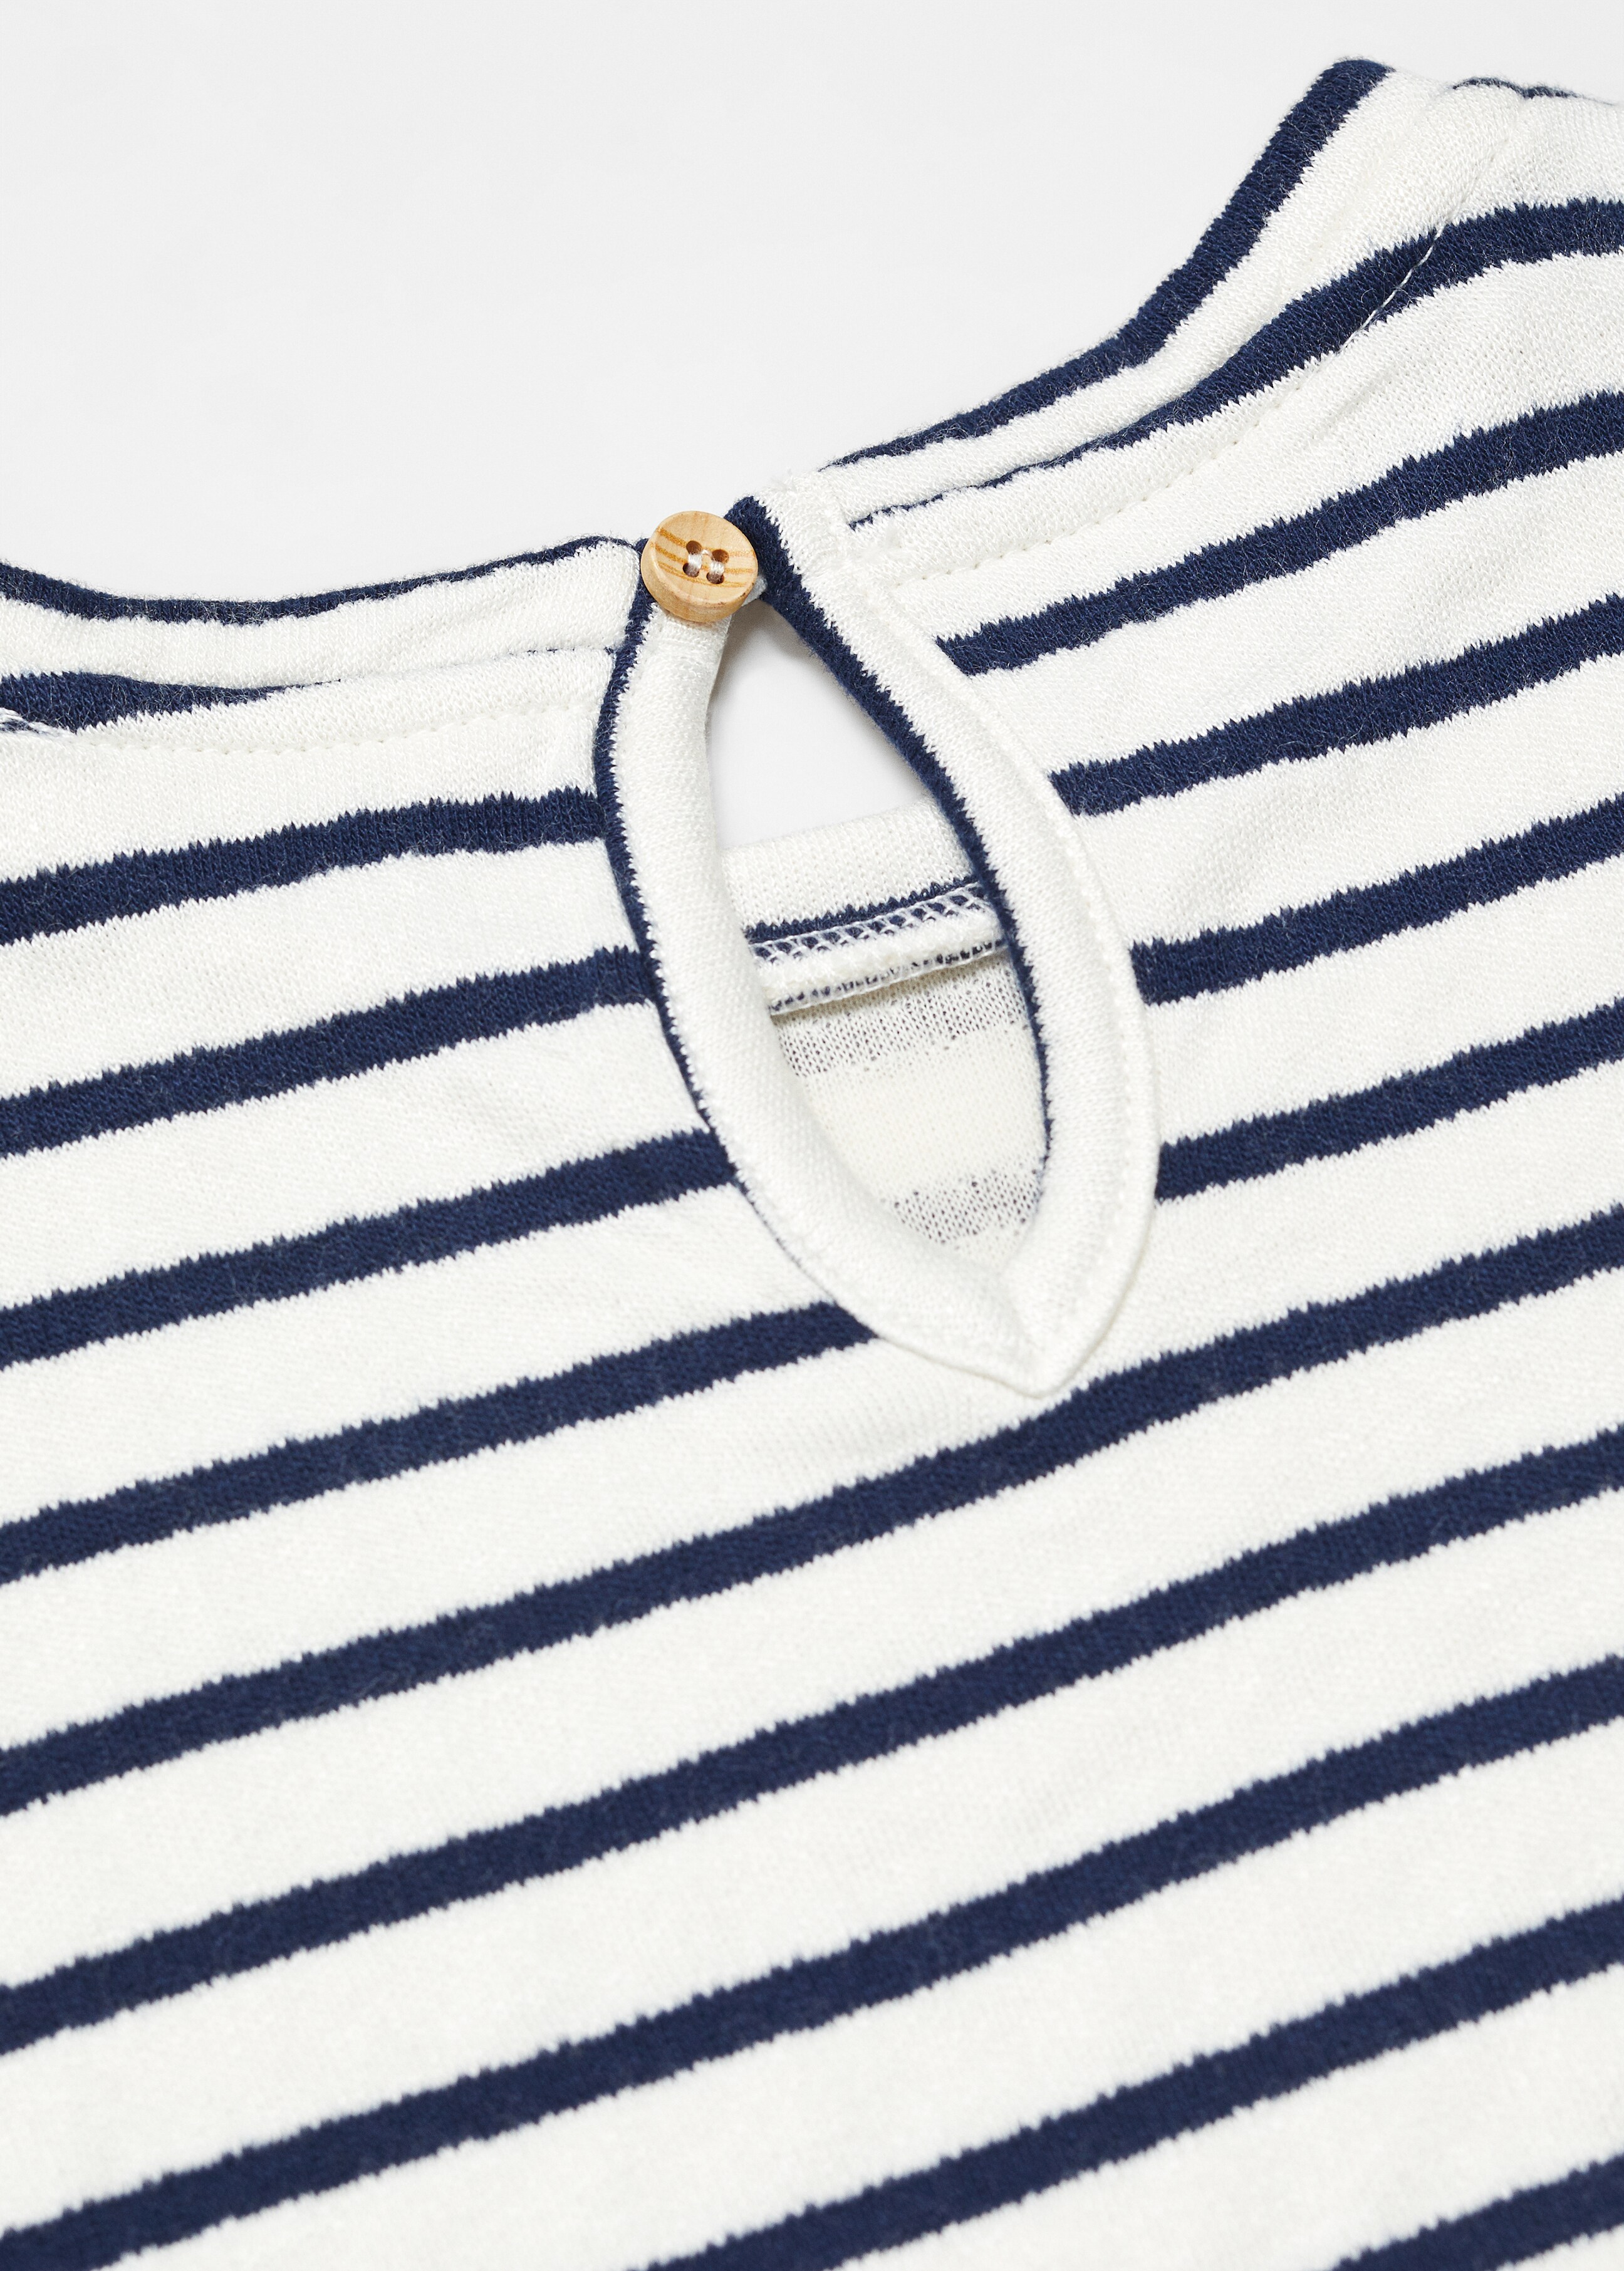 Striped dress - Details of the article 8